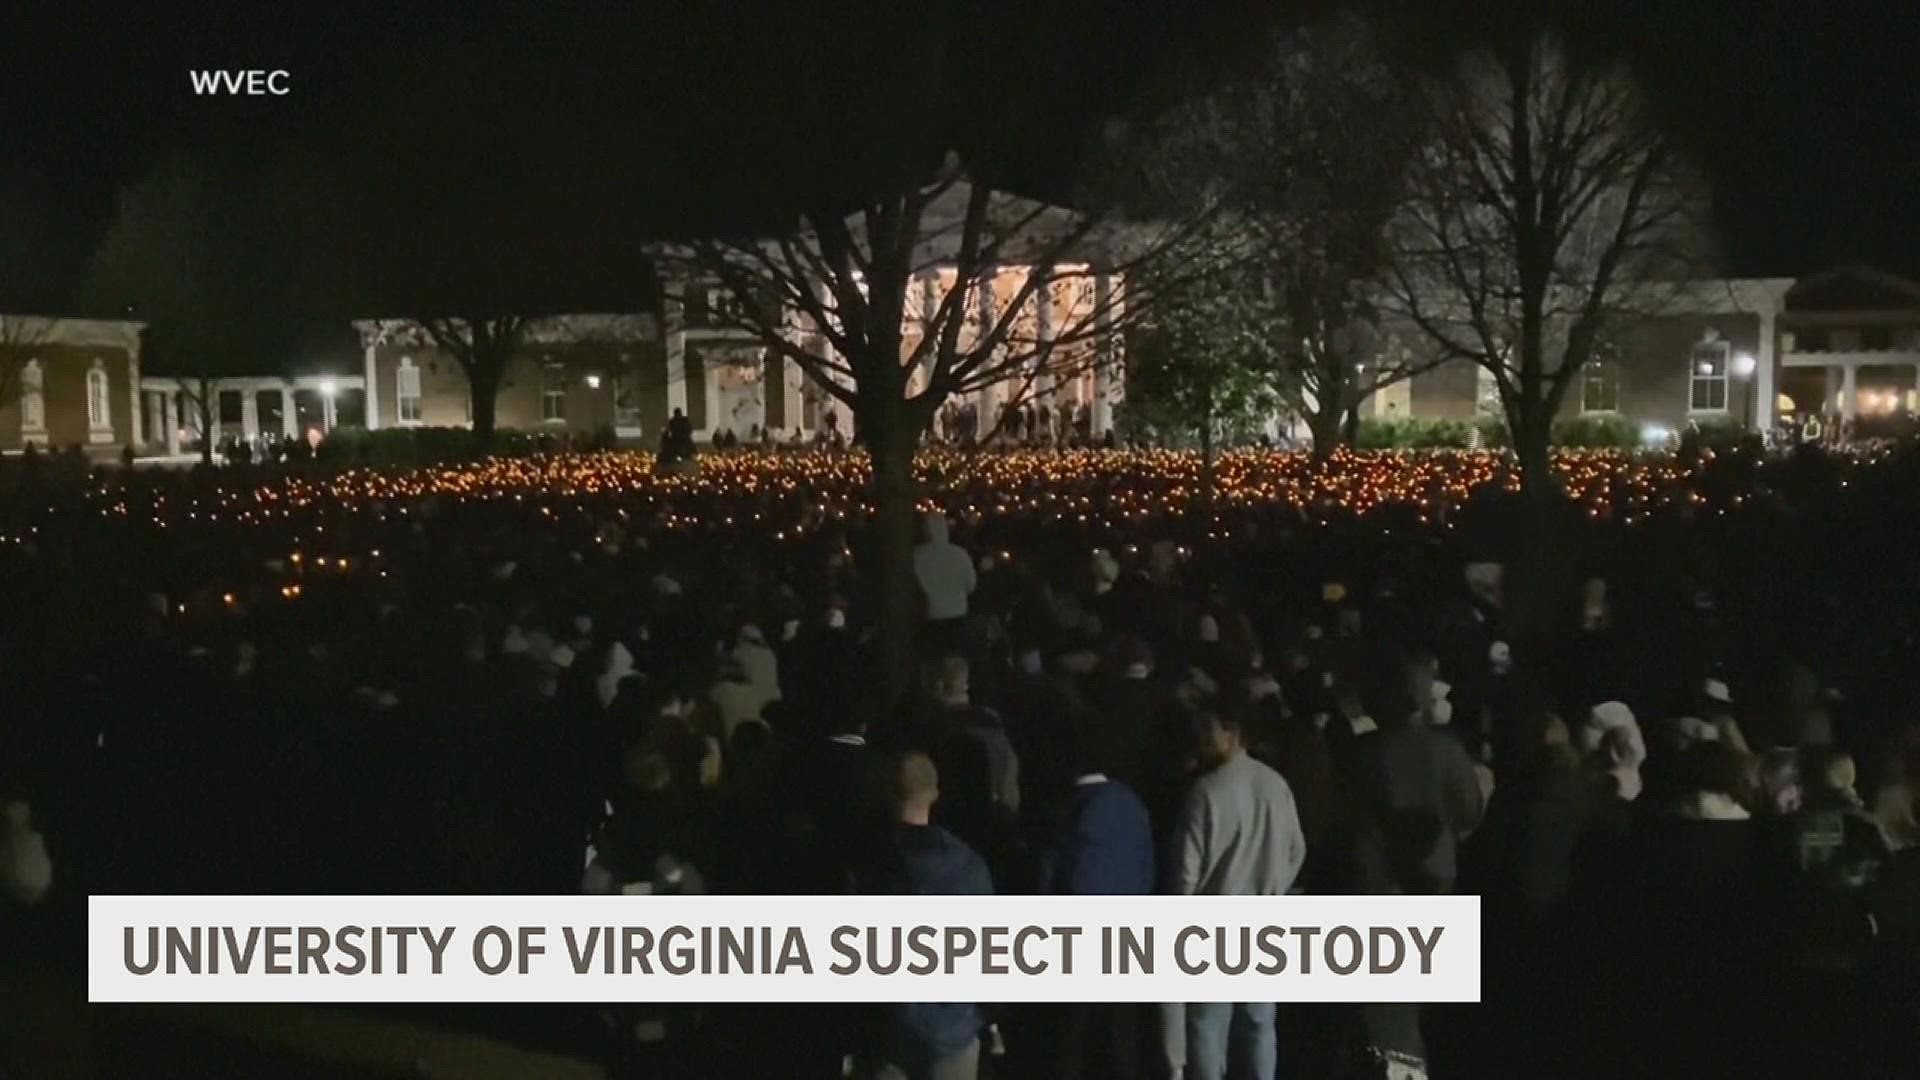 After a nearly 13-hour manhunt, a University of Virginia Student is in police custody this morning, accused of killing three fellow students.